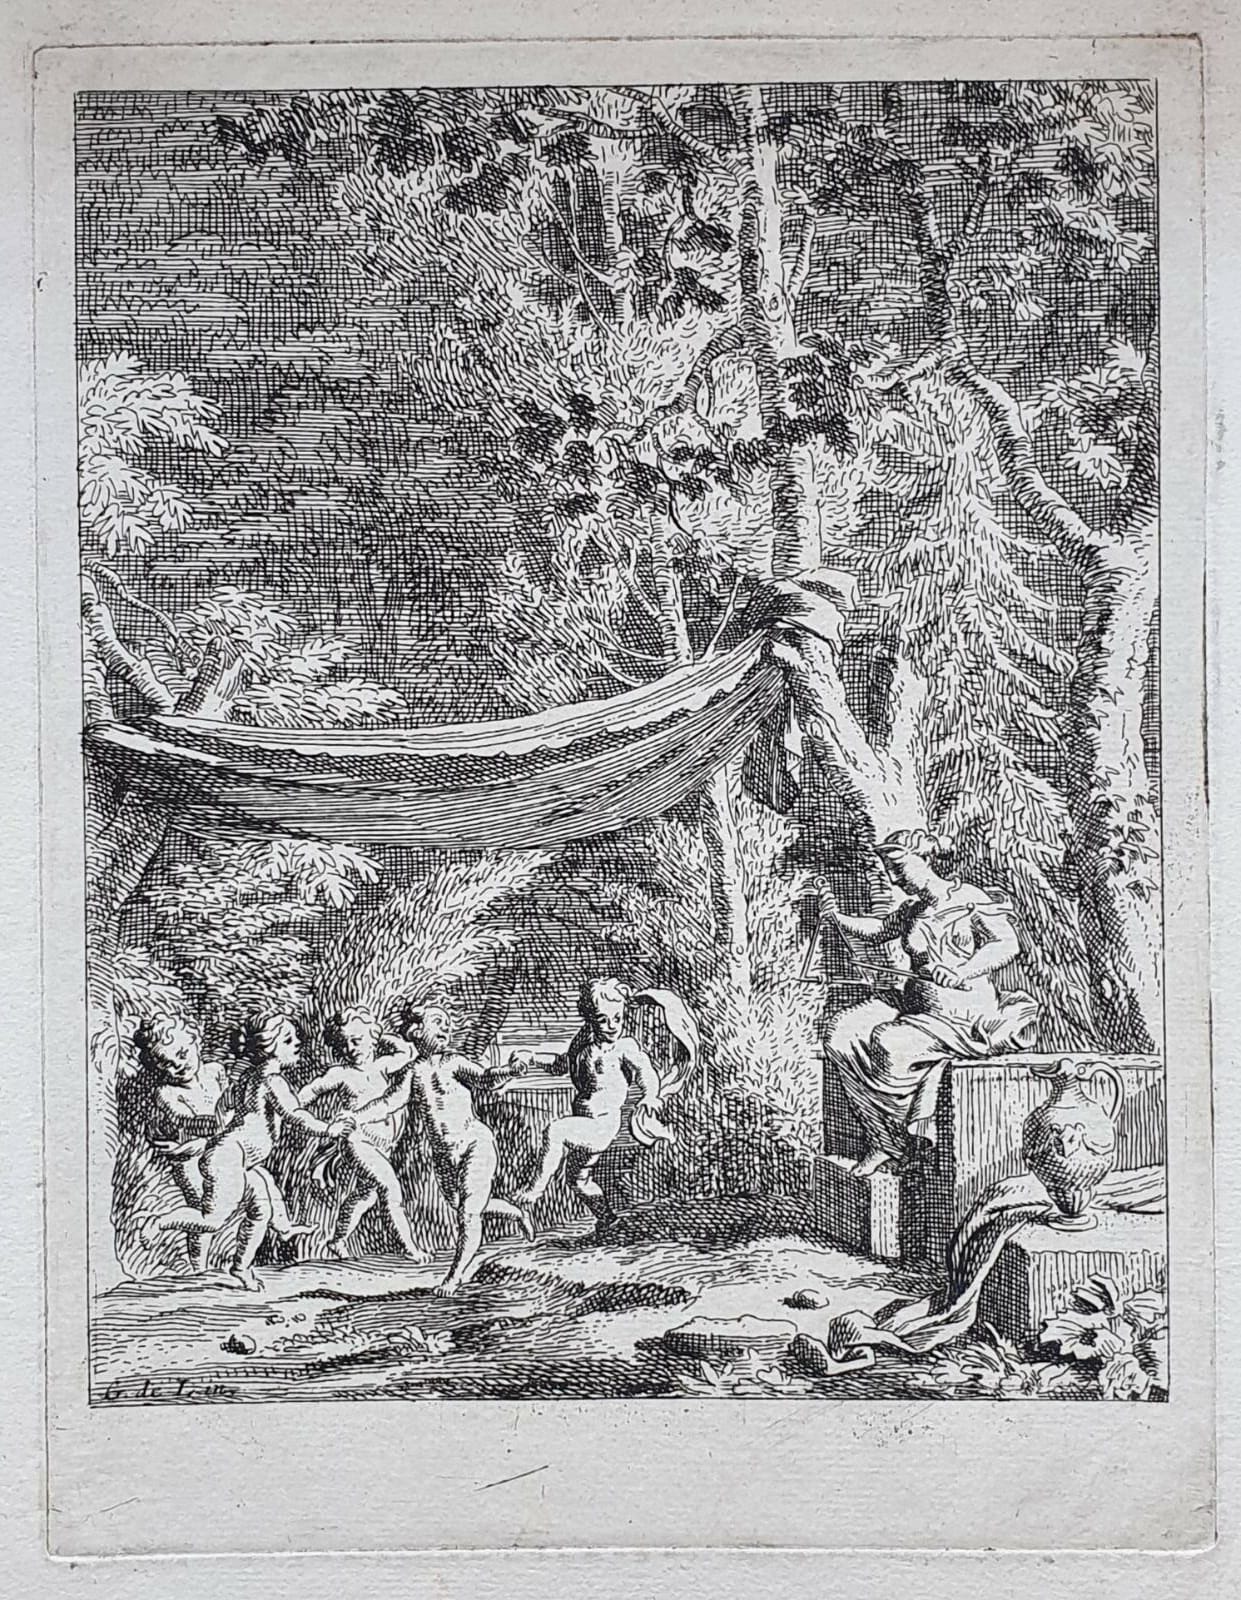 [Antique print, etching/ets] Five putti dance to the music of a triangle, published 1650-1750.